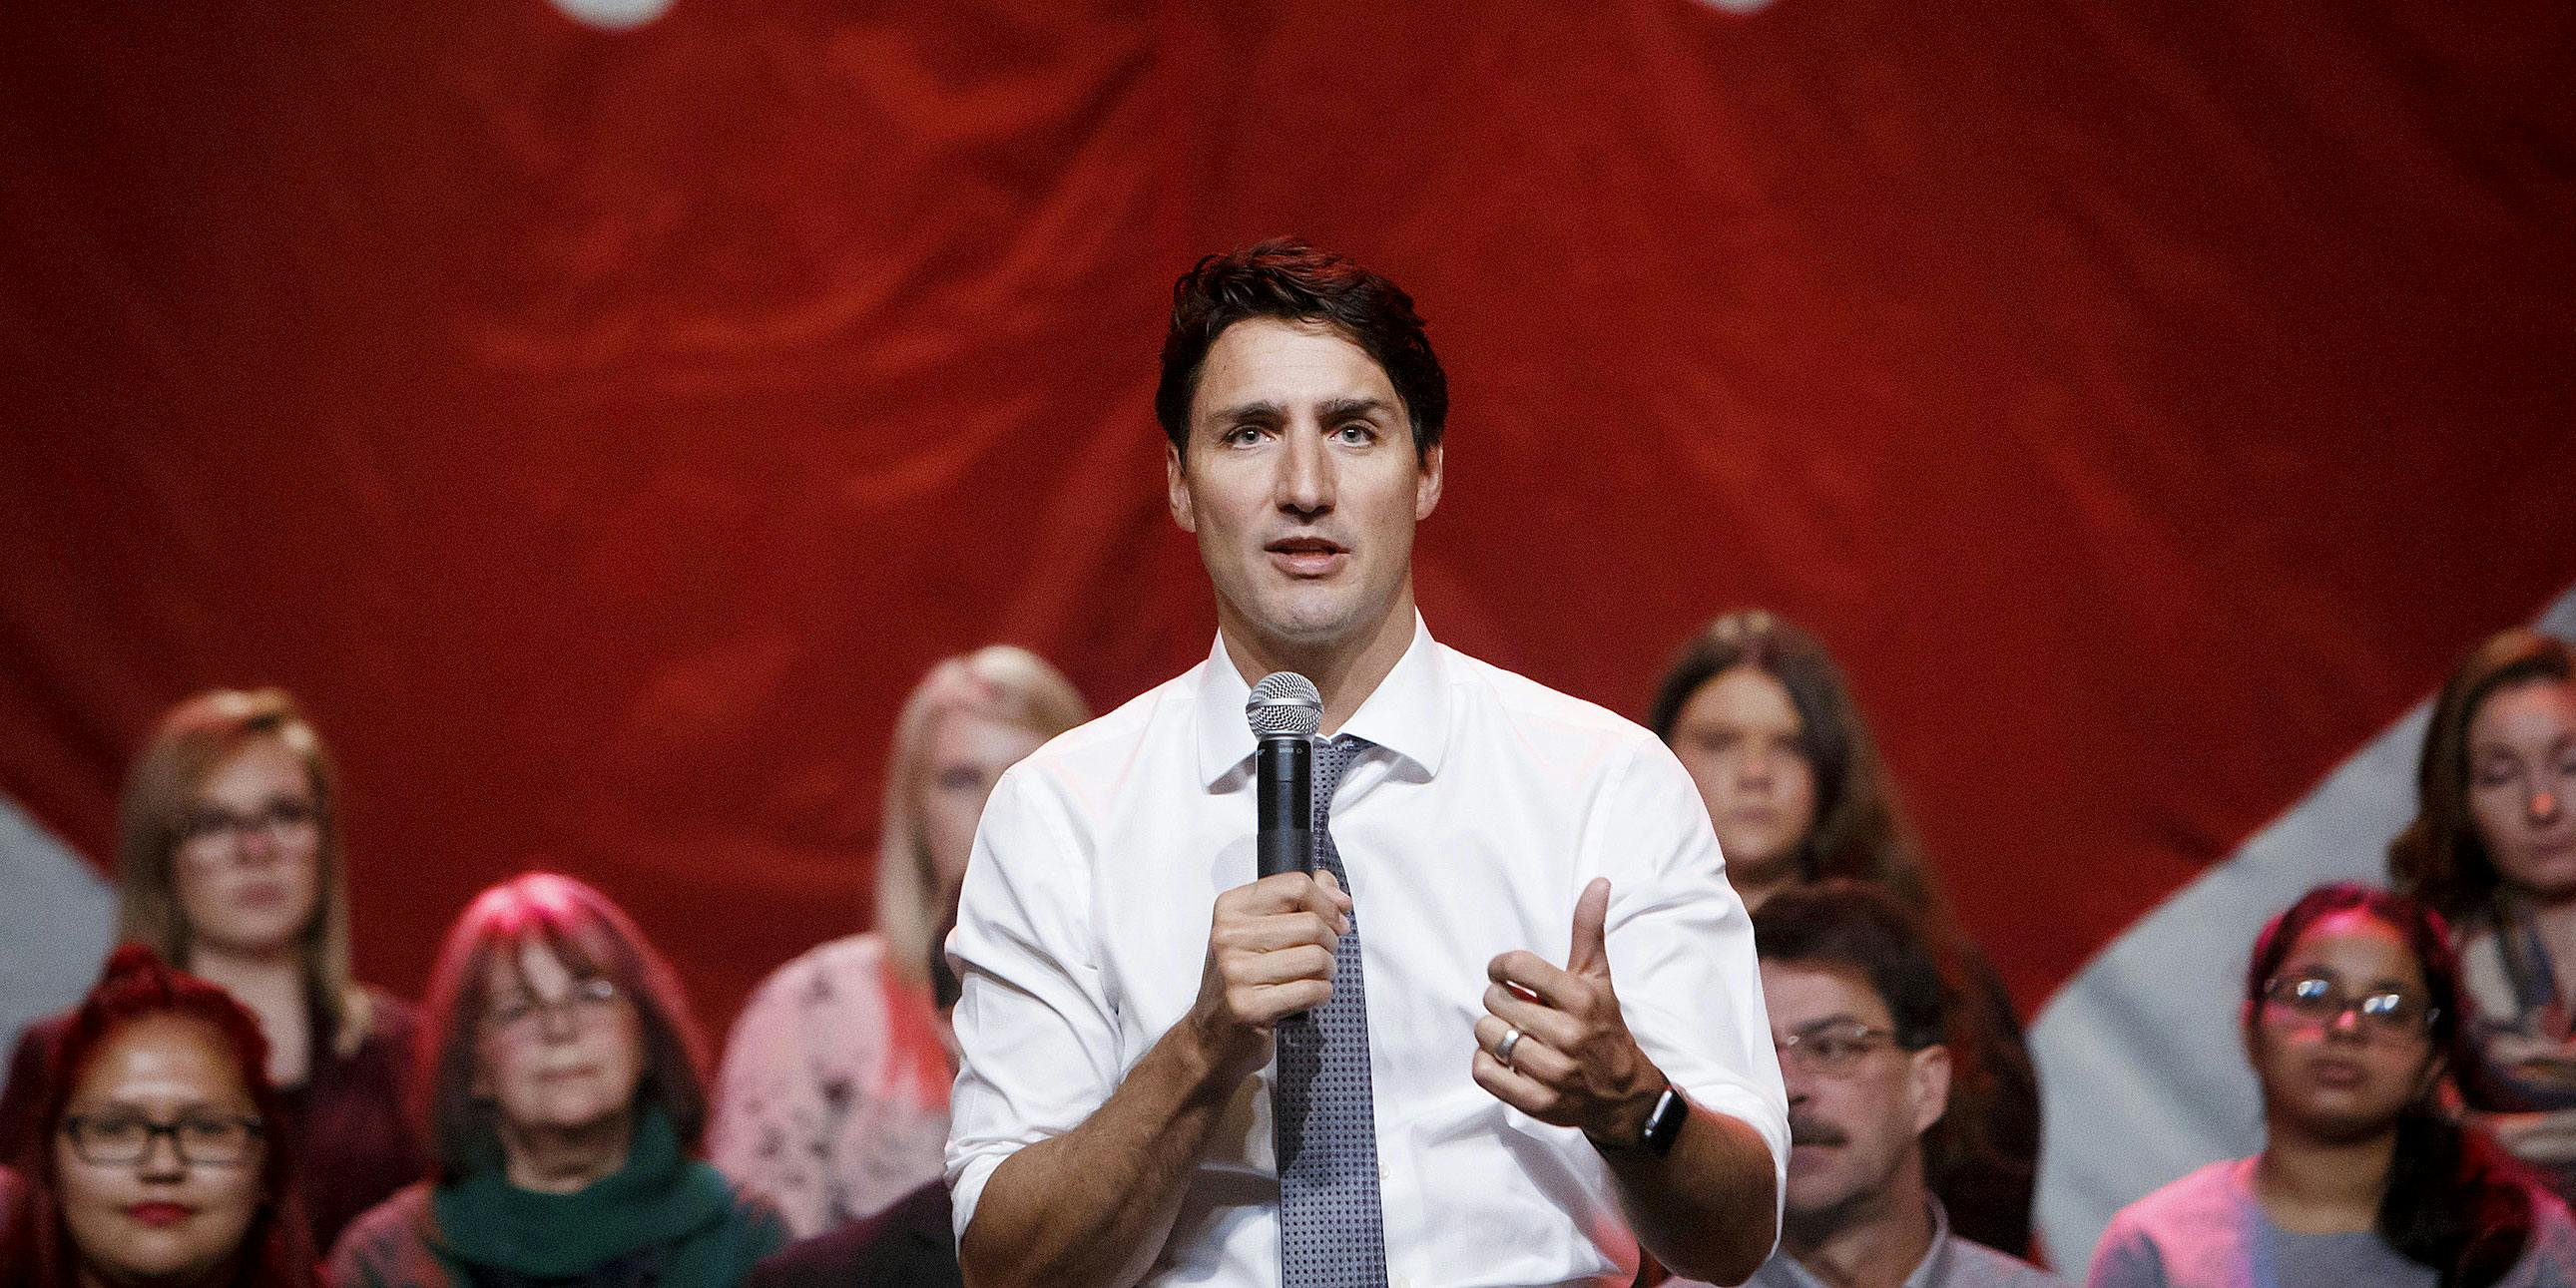 ustin Trudeau, Canada's prime minister, speaks during a town hall event in Belleville, Ontario about legalizing cannabis in canada